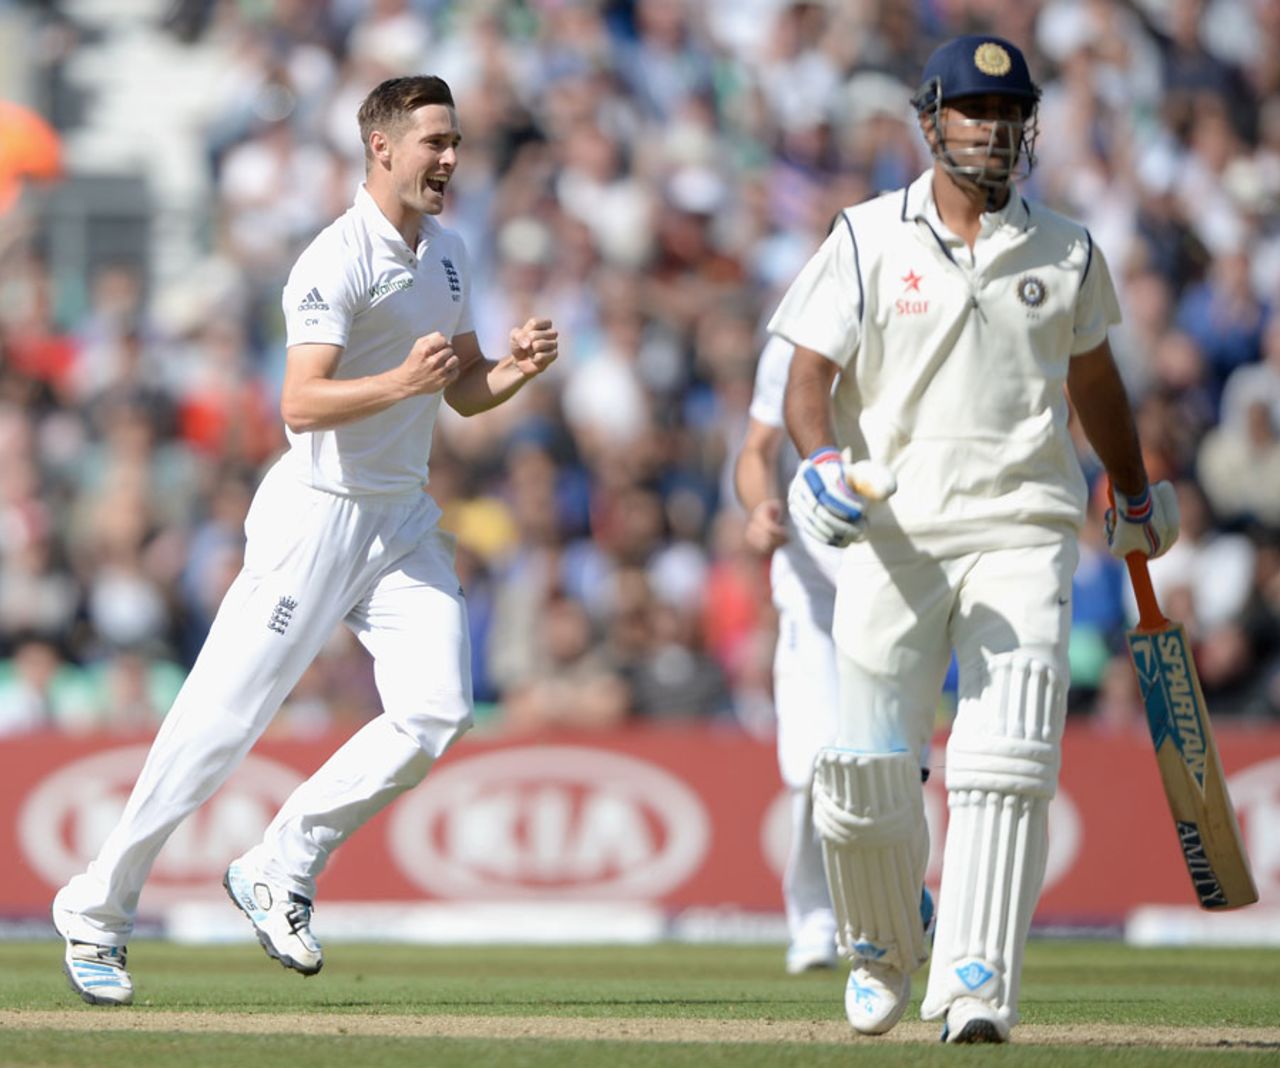 Chris Woakes removed MS Dhoni for a duck, England v India, 5th Investec Test, The Oval, 3rd day, August 17, 2014